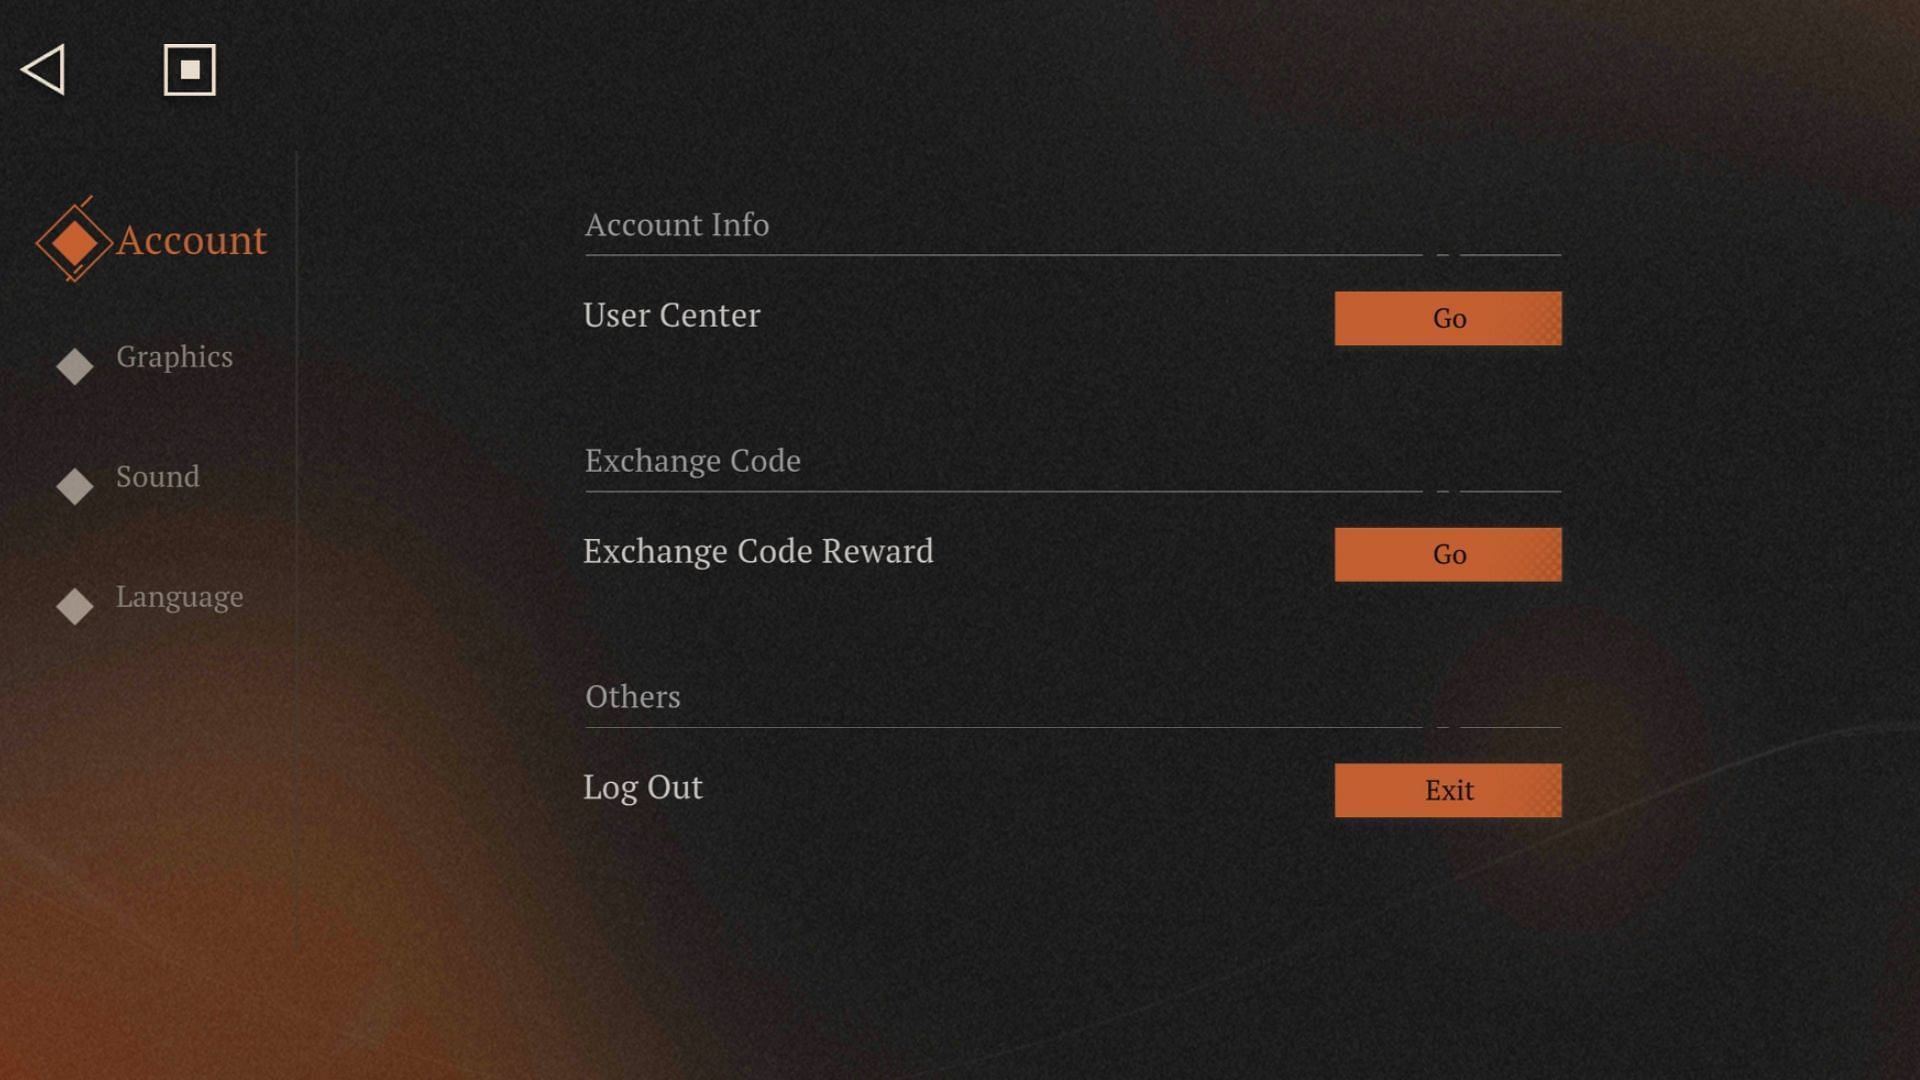 Tap the Go button next to Exchange Code Reward to open the code redemption dialog box (Image via Bluepoch)